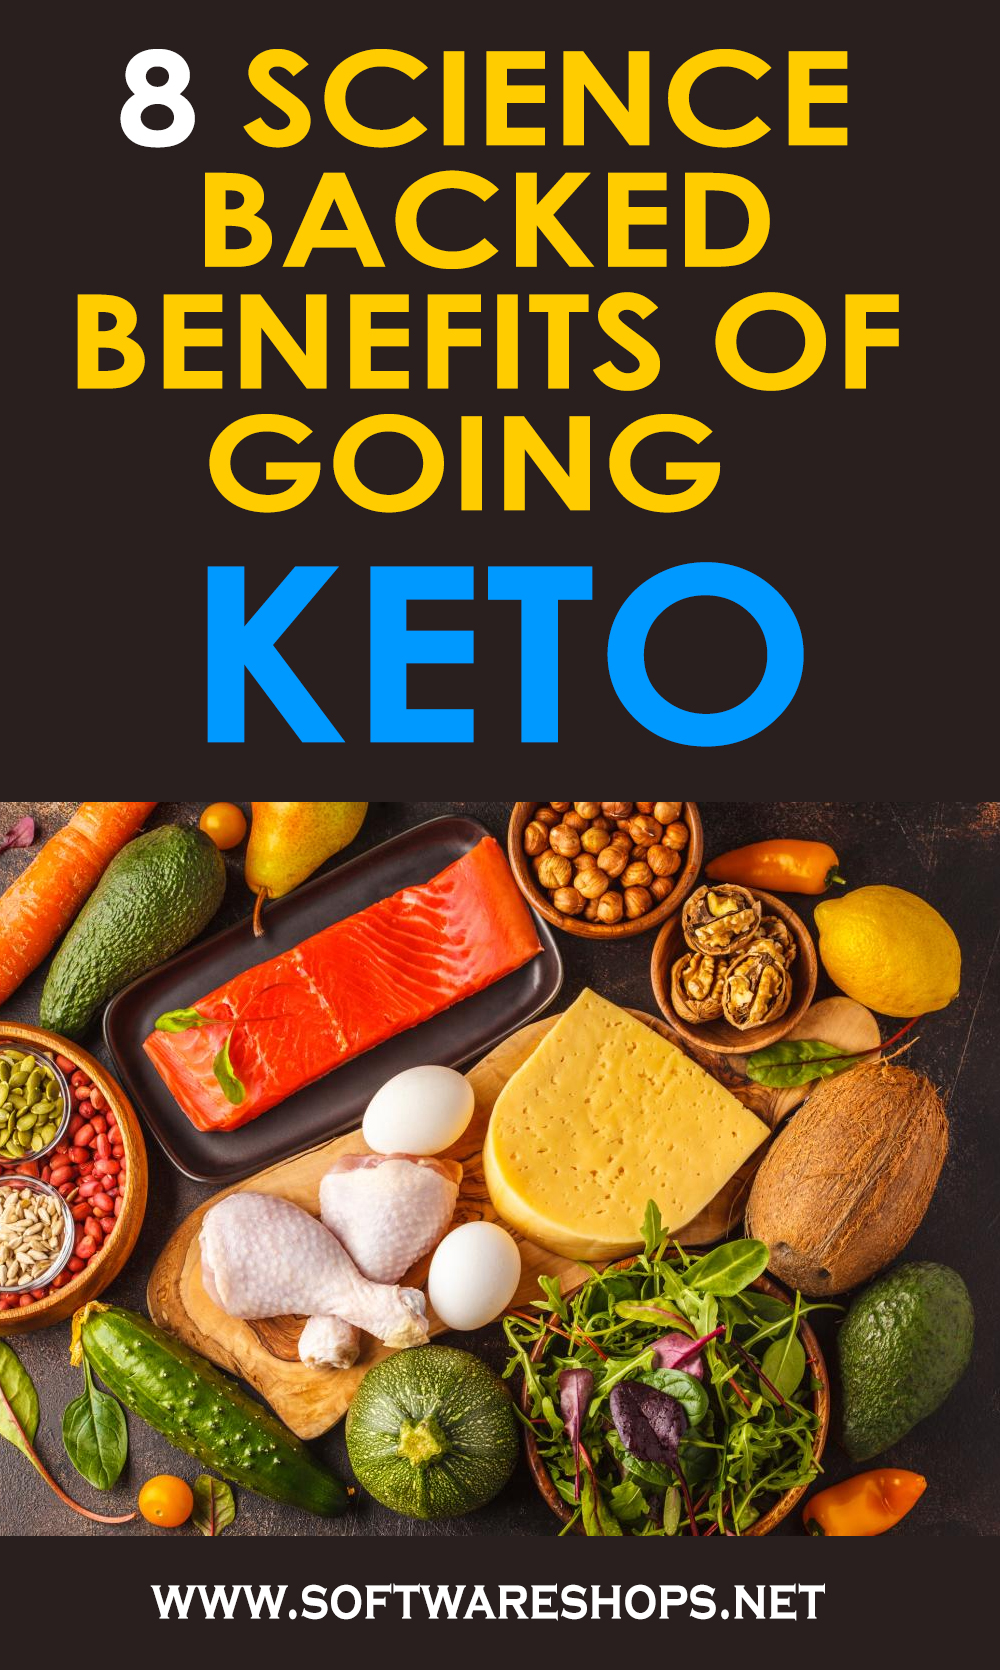 Eight science-backed benefits of going keto